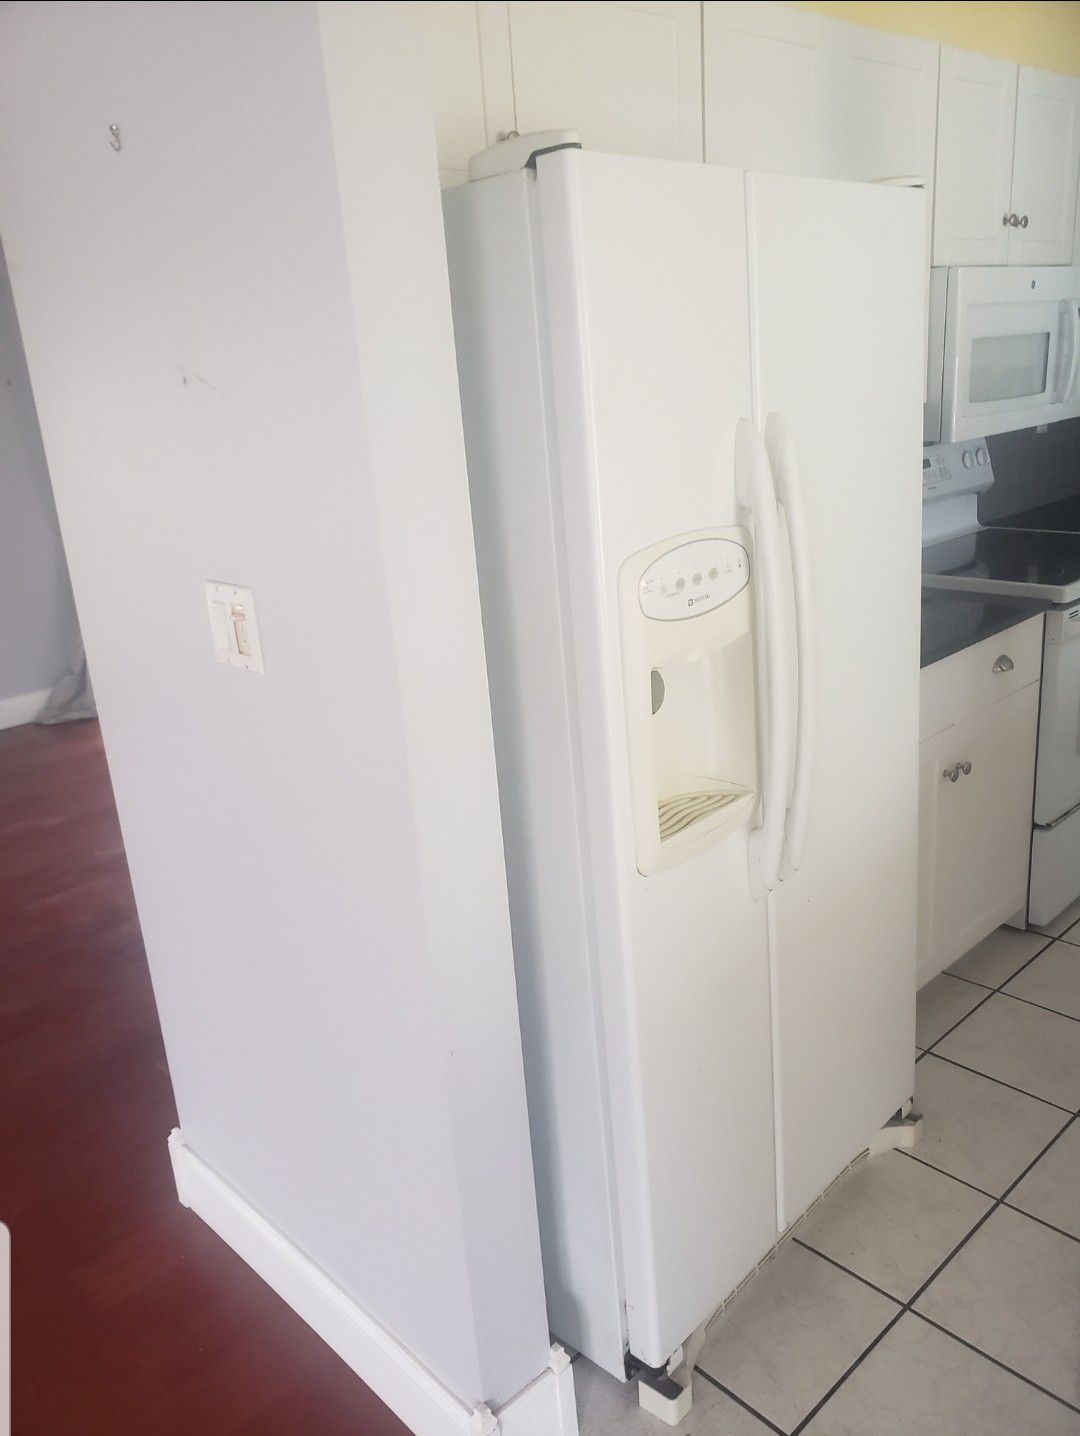 Full white appliances kitchen set - everything works and in great condition !